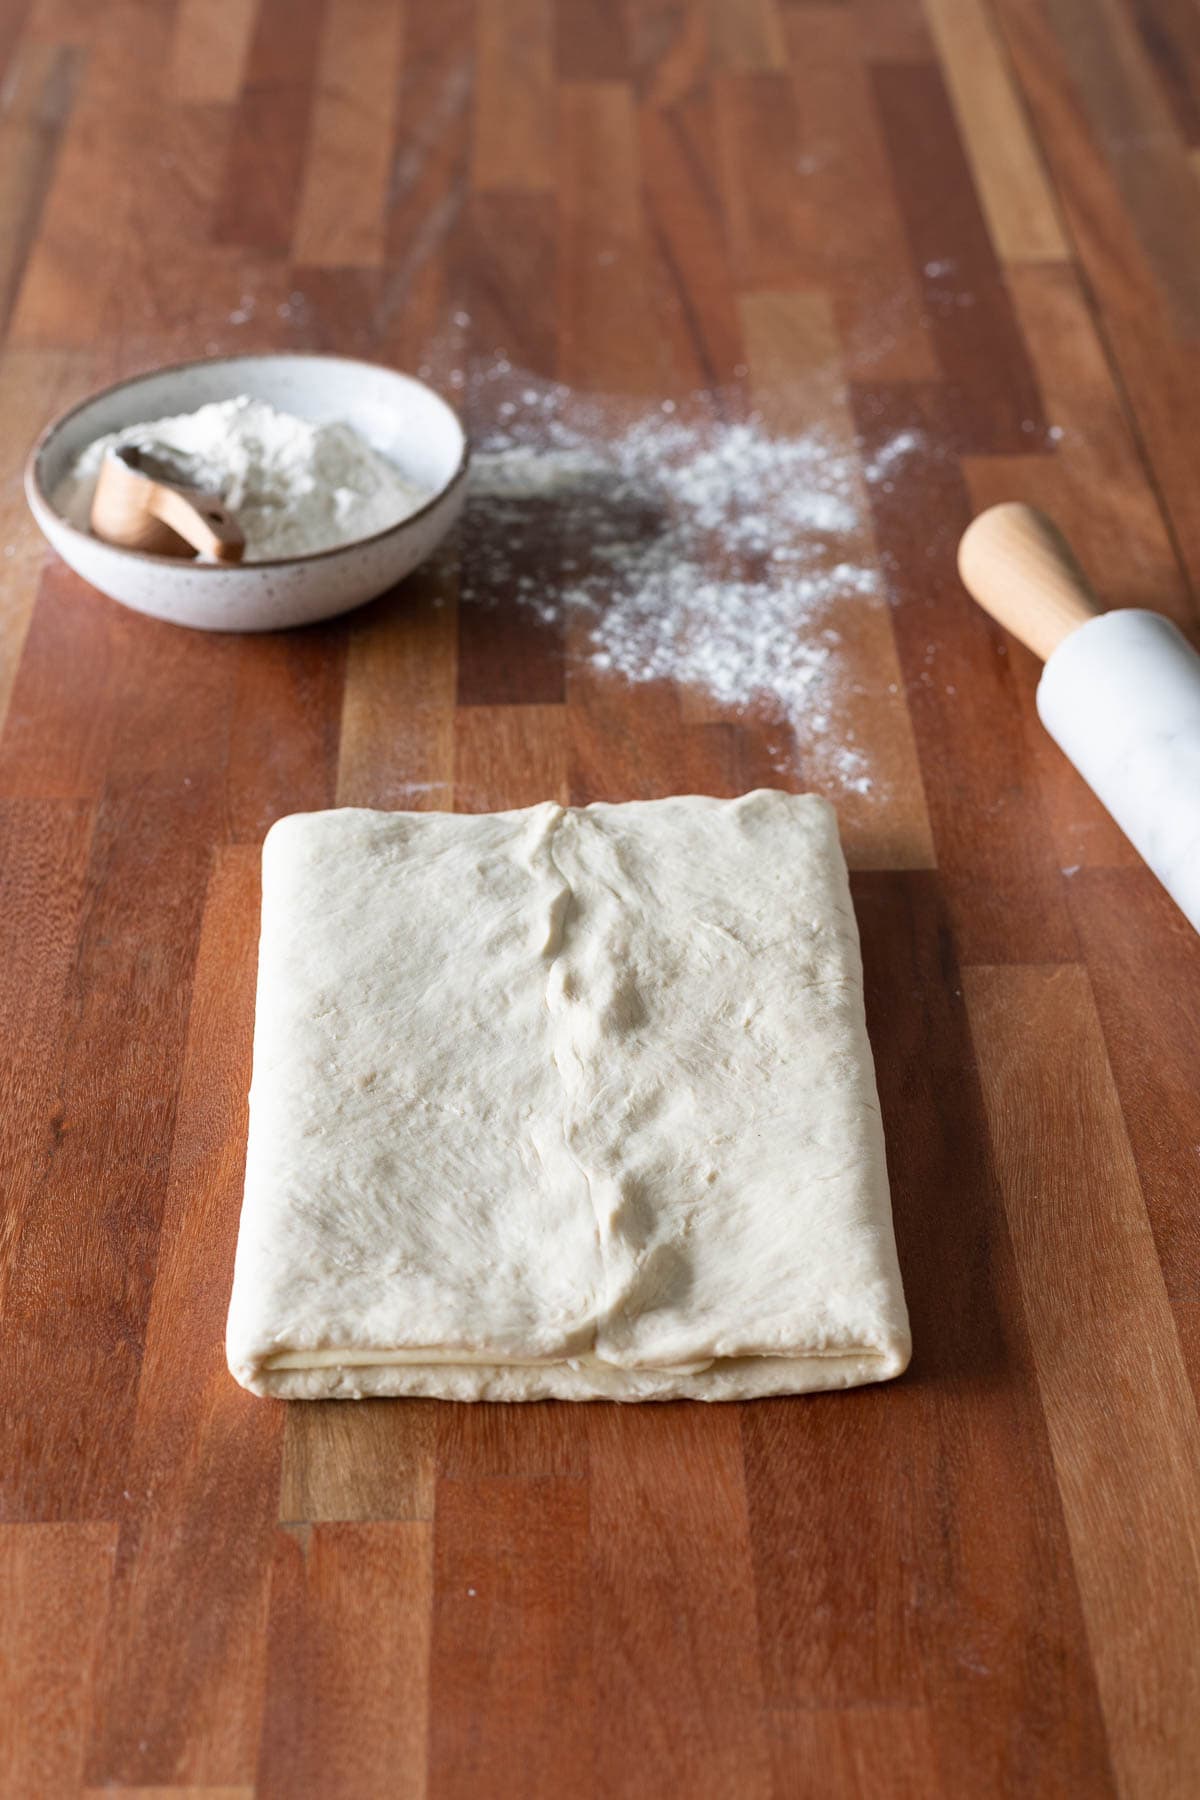 Croissant dough folded like a book with a bowl of flour